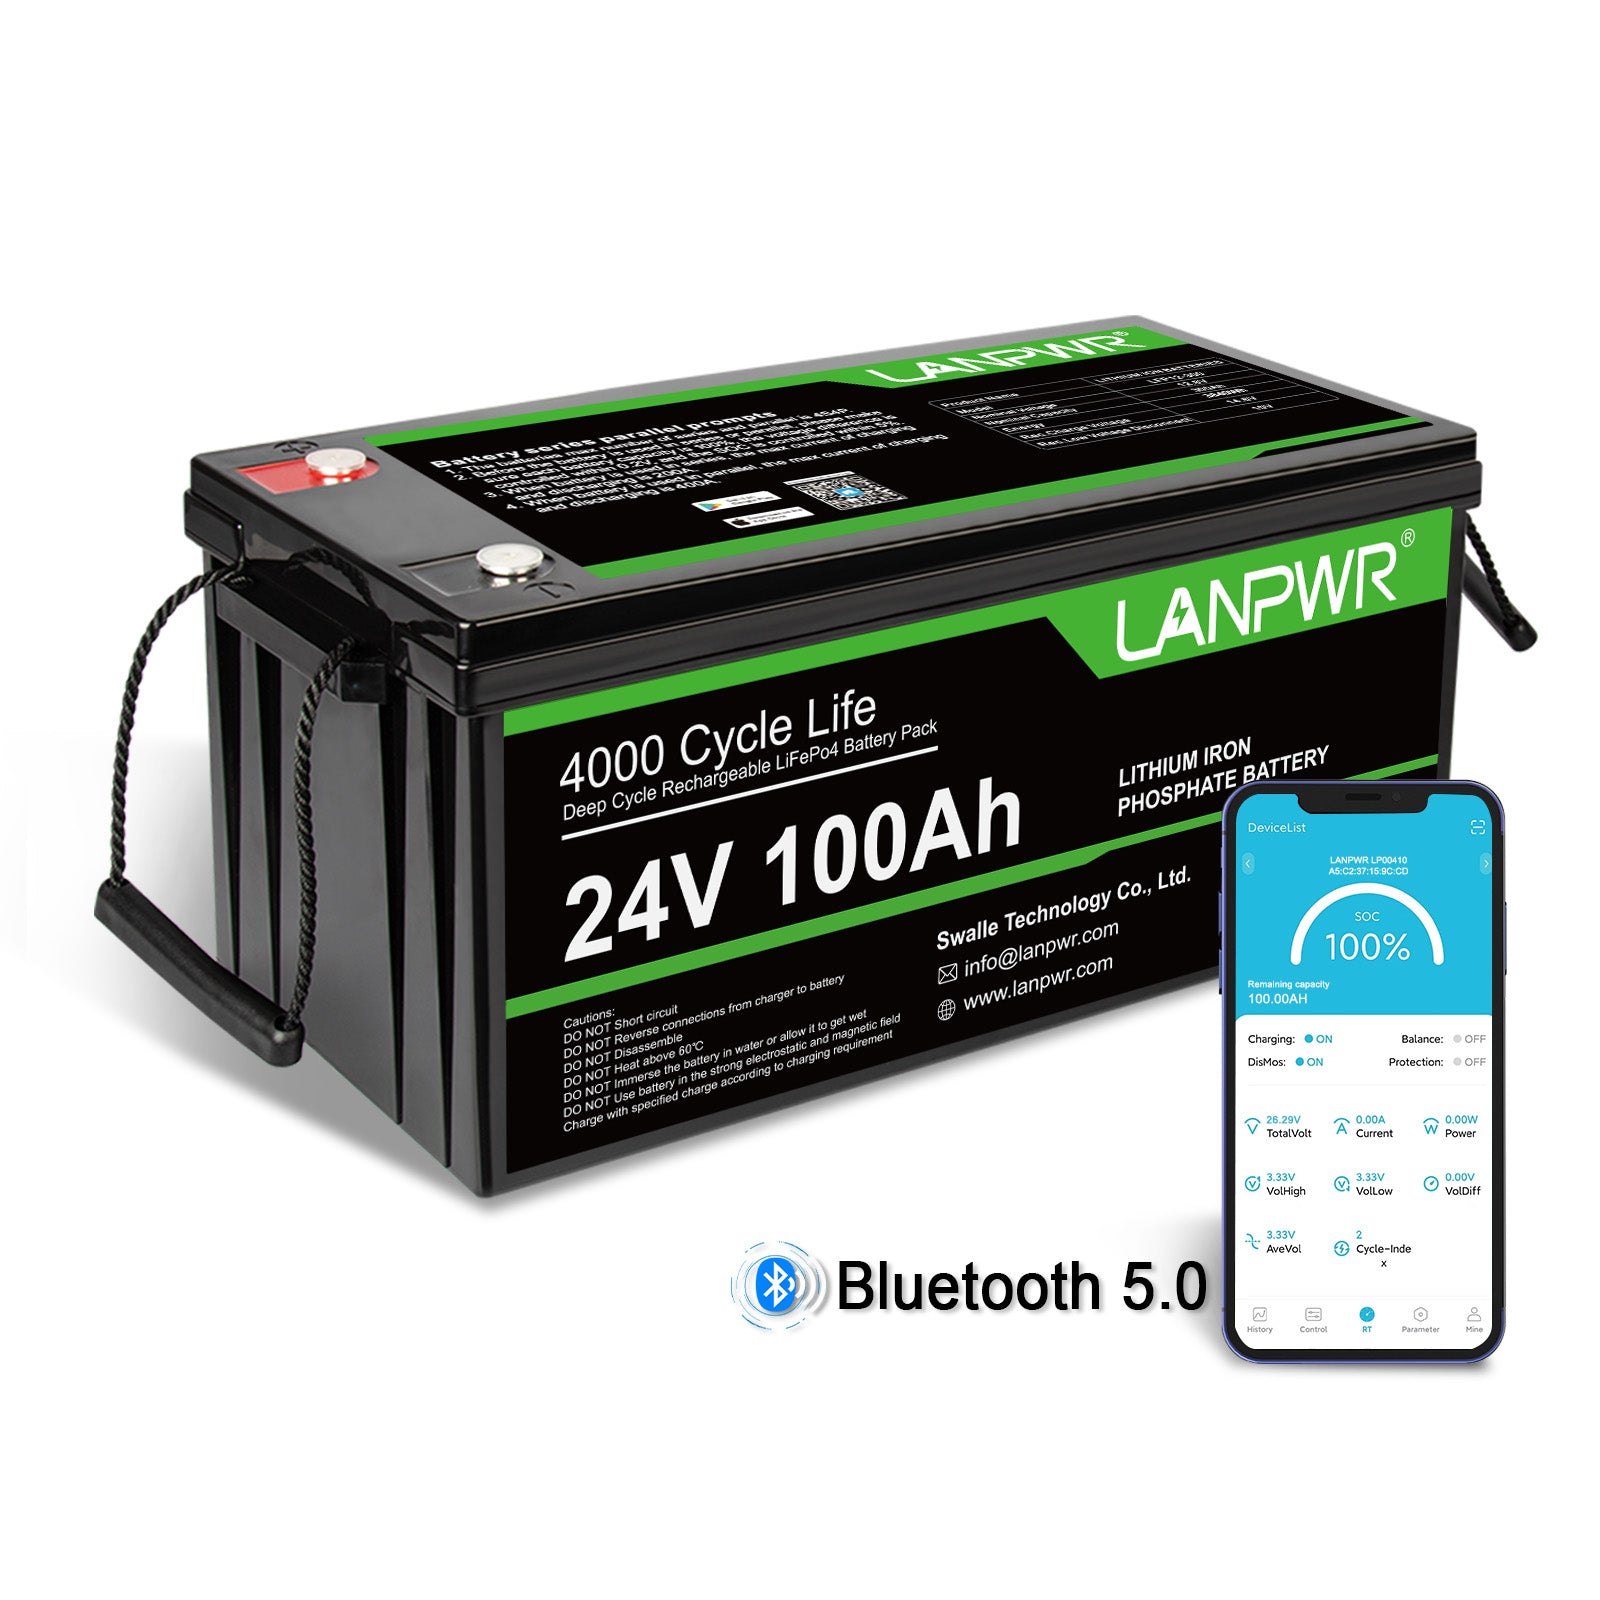 LANPWR 24V 100Ah LiFePO4 Battery with Bluetooth 5.0, Maximum Load Power 2560W, 2560Wh Energy